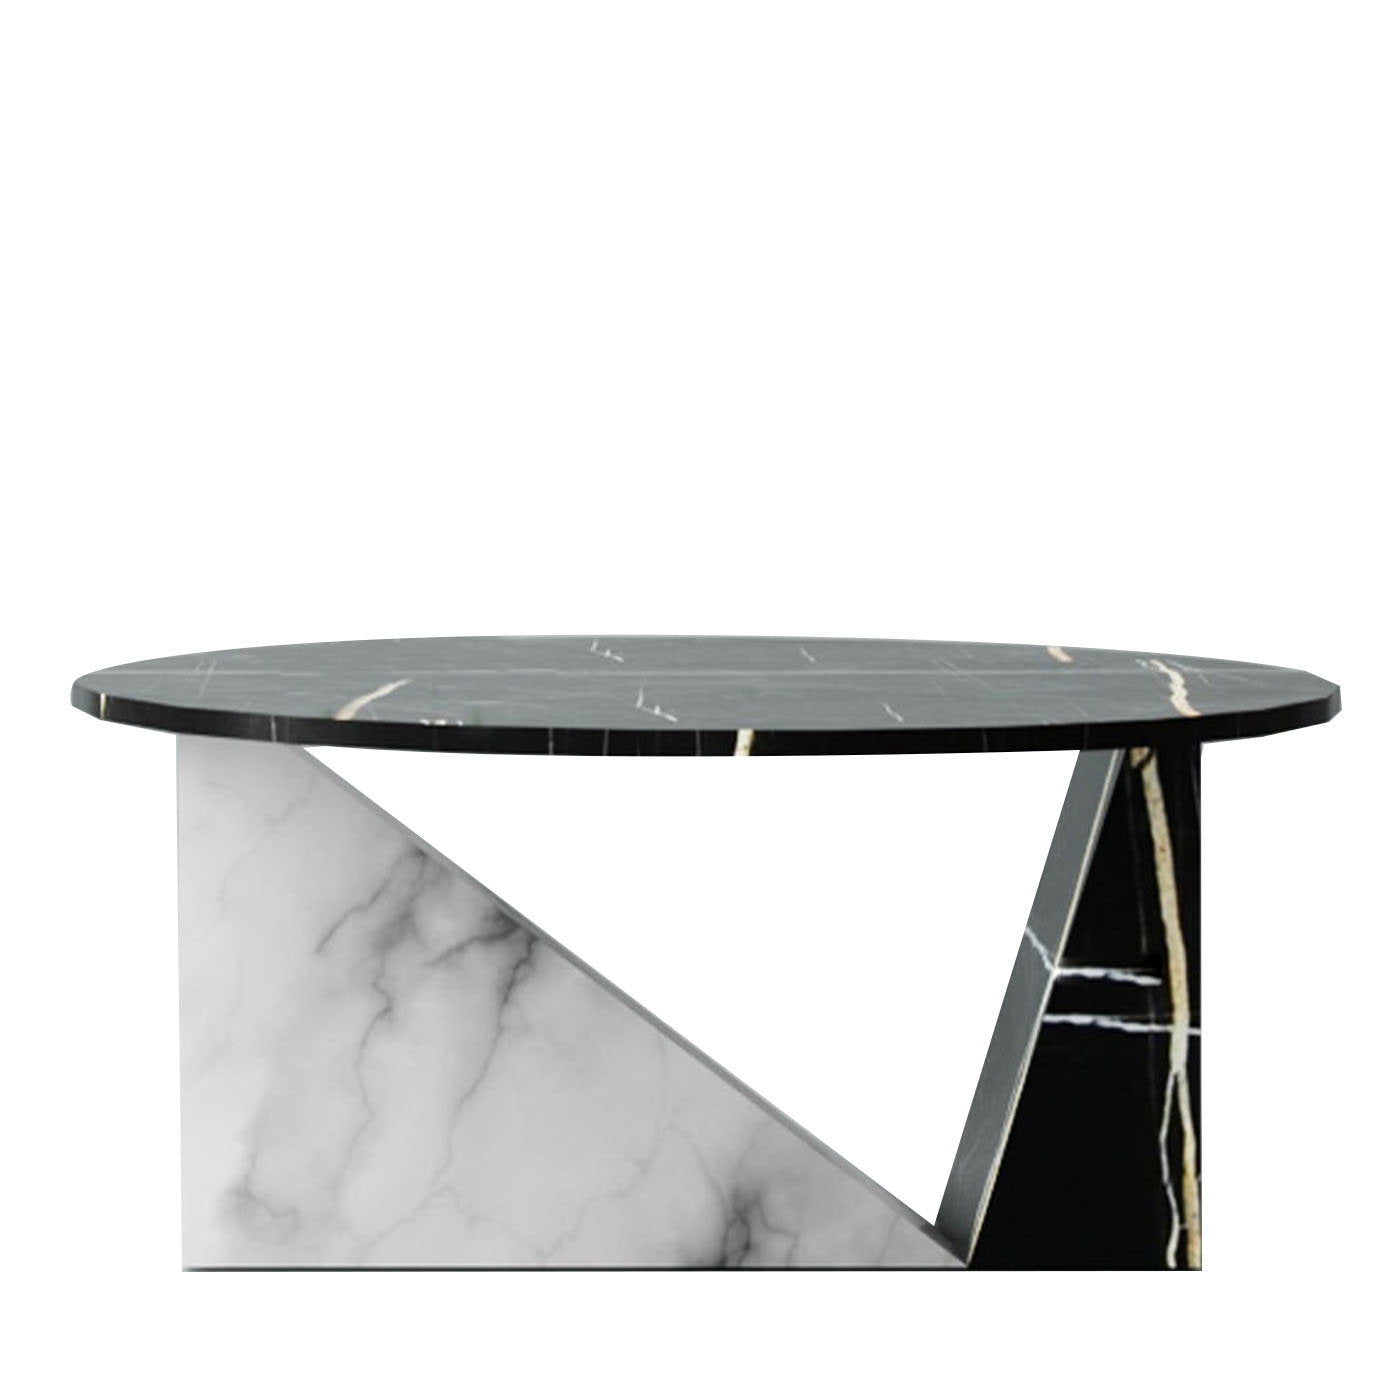 Dieus Table in White Carrara and Sahara Noir Marbles by sid&sign - Main view